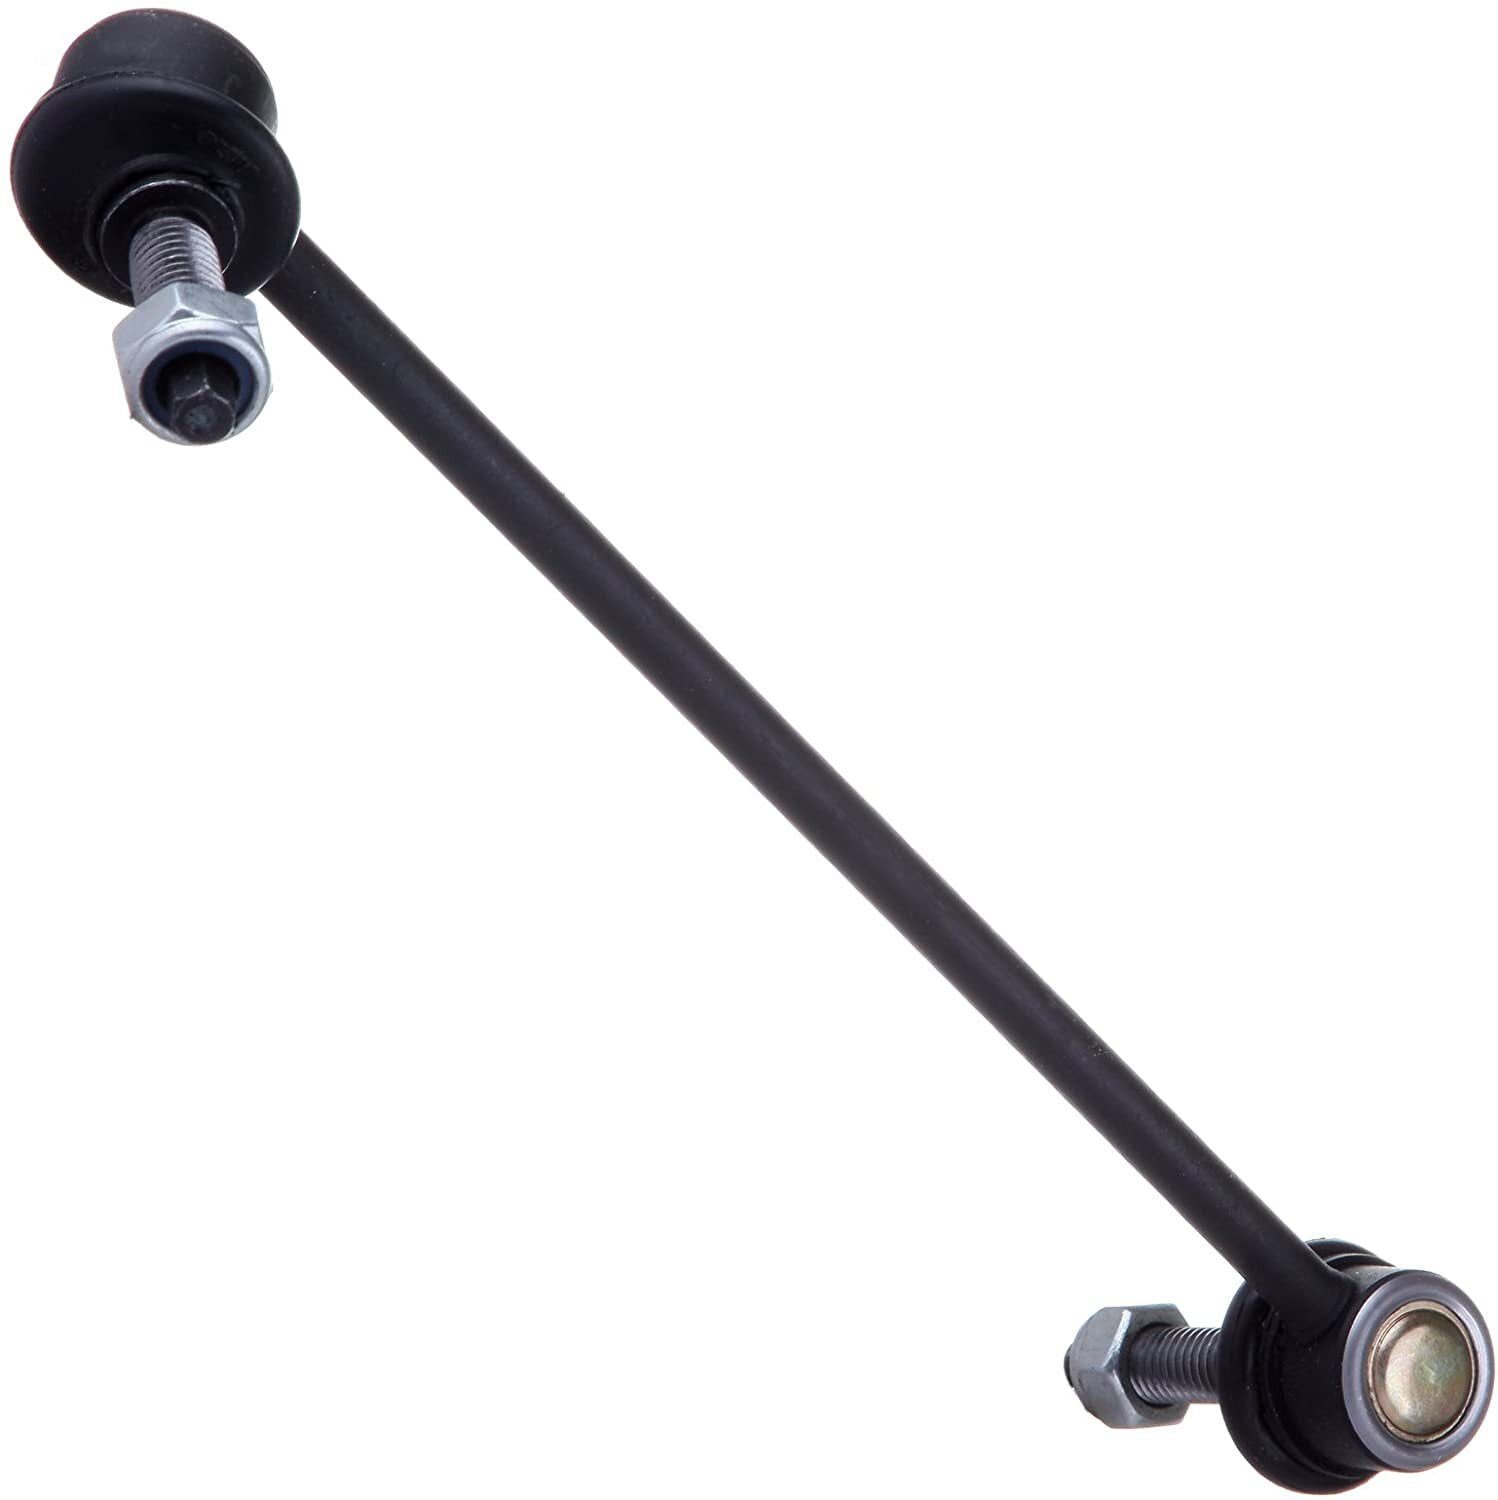 PartsW 2 Piece Suspension Kit Left & Right Sway Bar Links for Ford Taurus Sable Lincoln Continental & Mercury Sable 